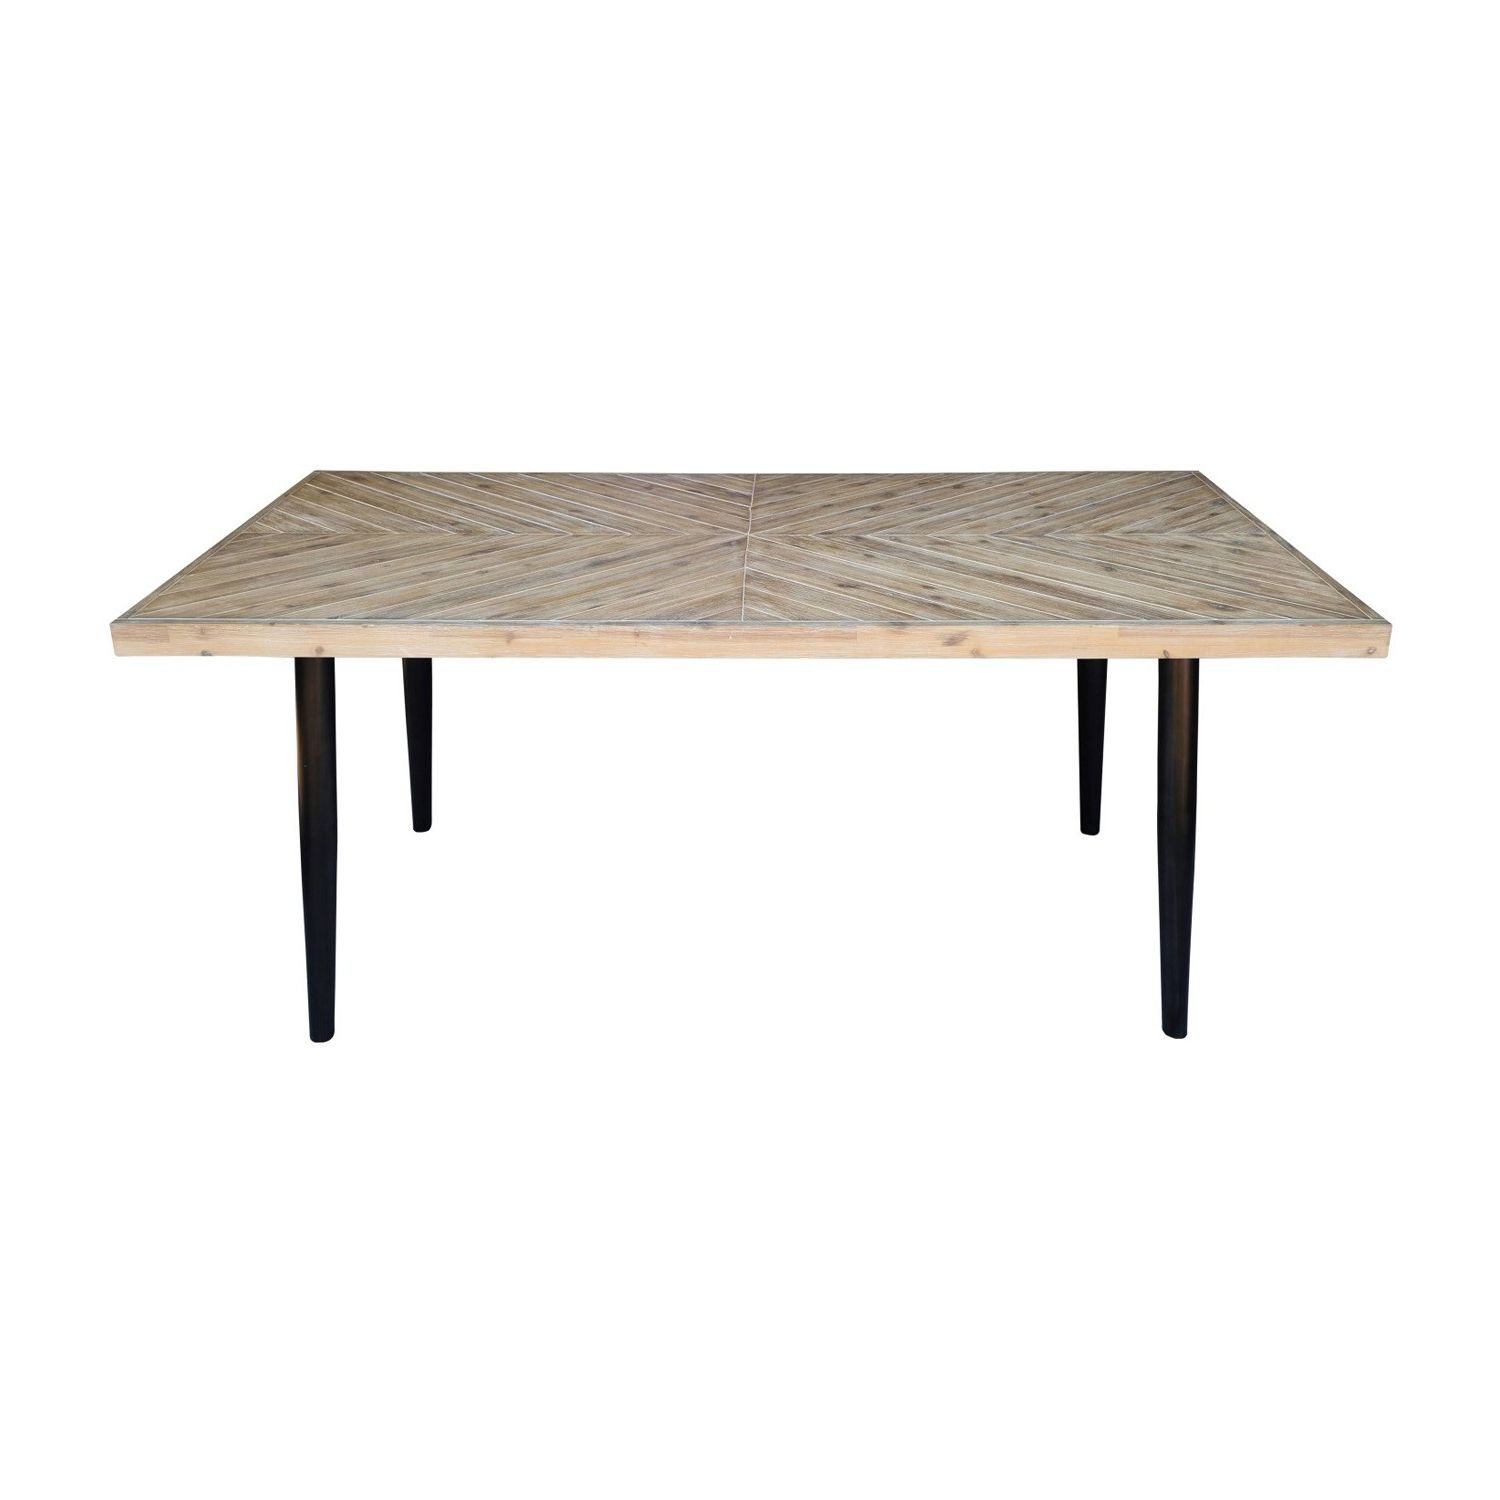 Jasmire Acacia Dining Table/71*39*30 – Td1341 Ea 00 Throughout Fashionable Balfour 39'' Dining Tables (View 5 of 20)